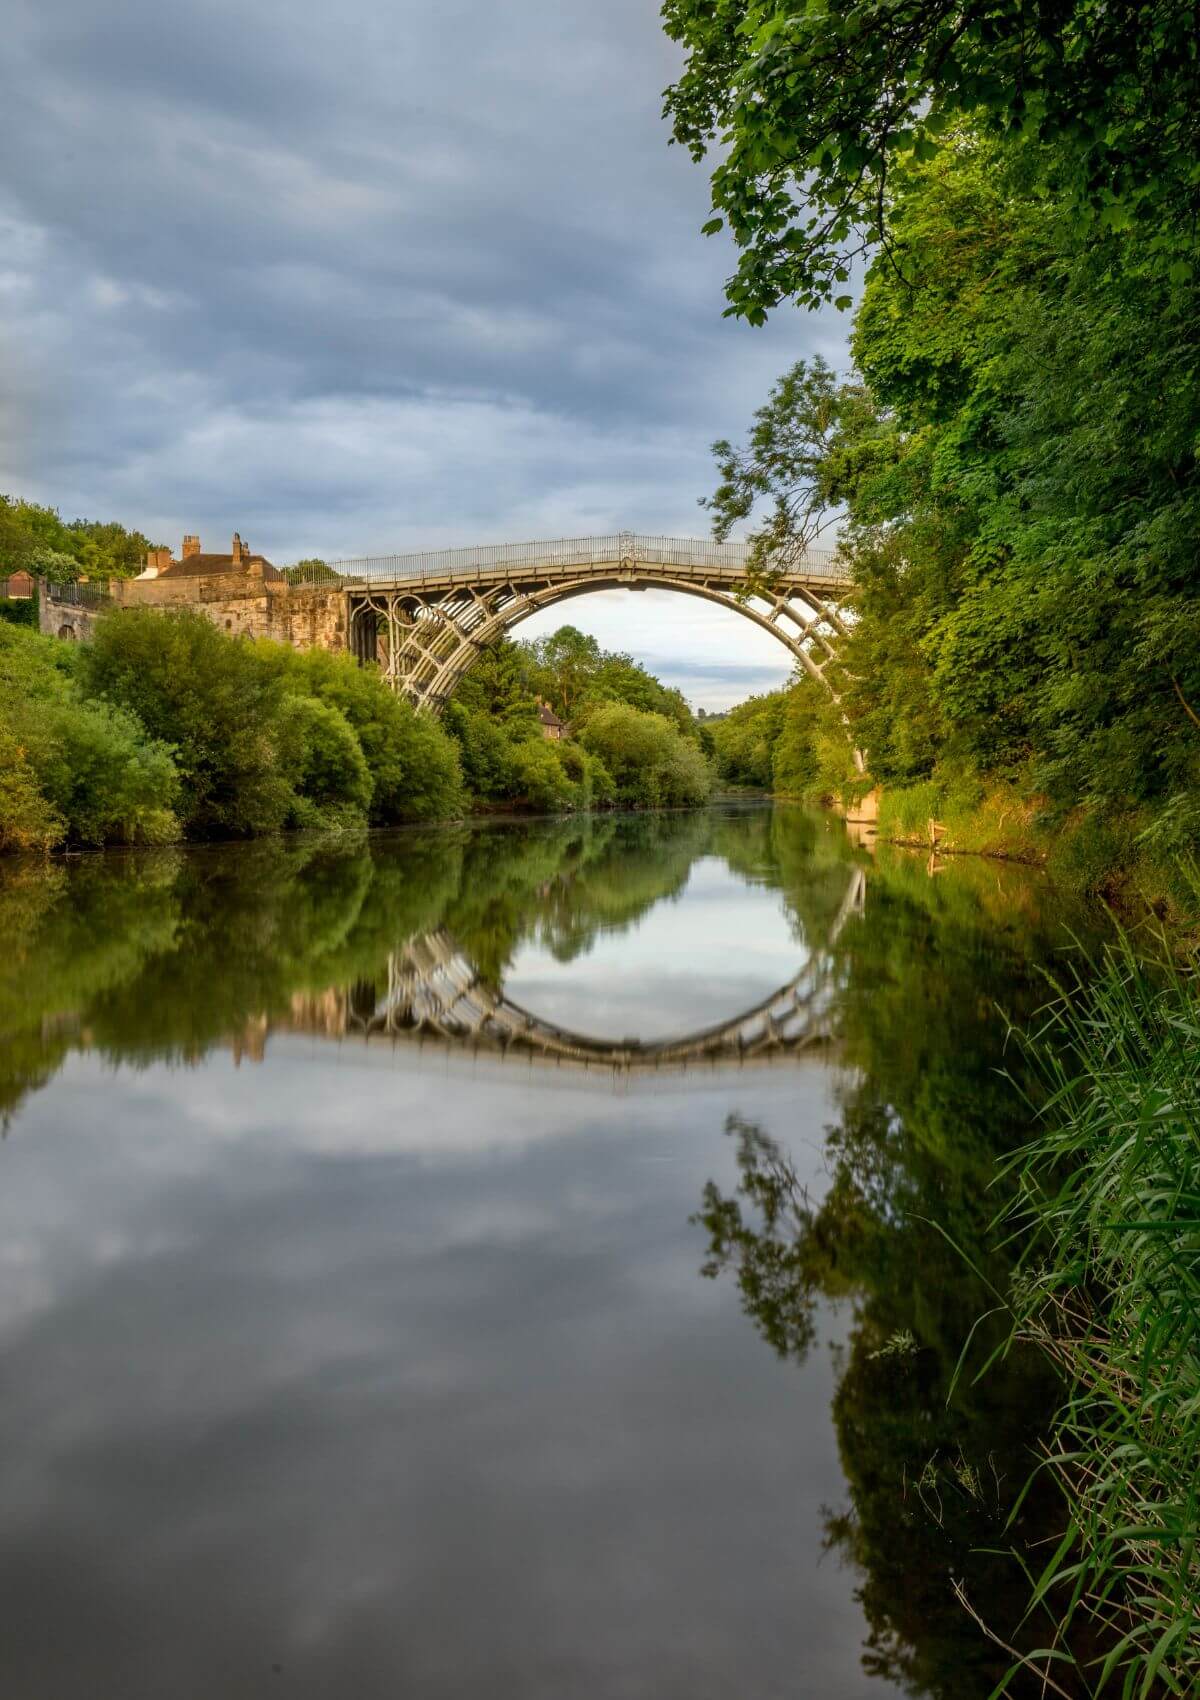 Day trip from Birmingham to the UNESCO-listed Ironbridge Gorge